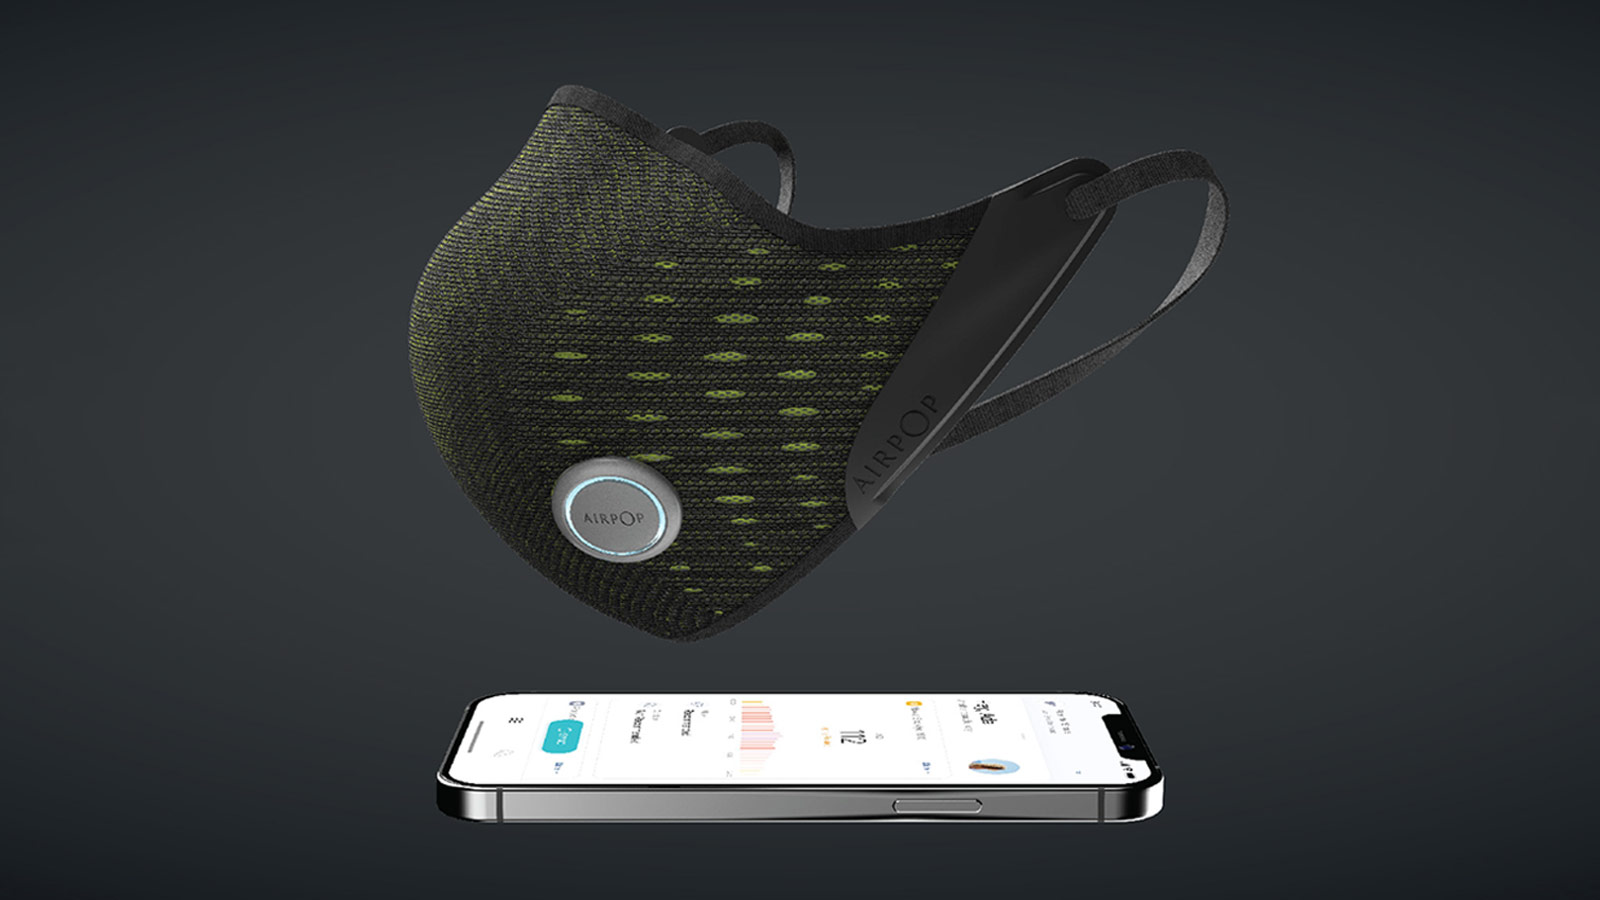 The AirPop Active+ Smart Mask